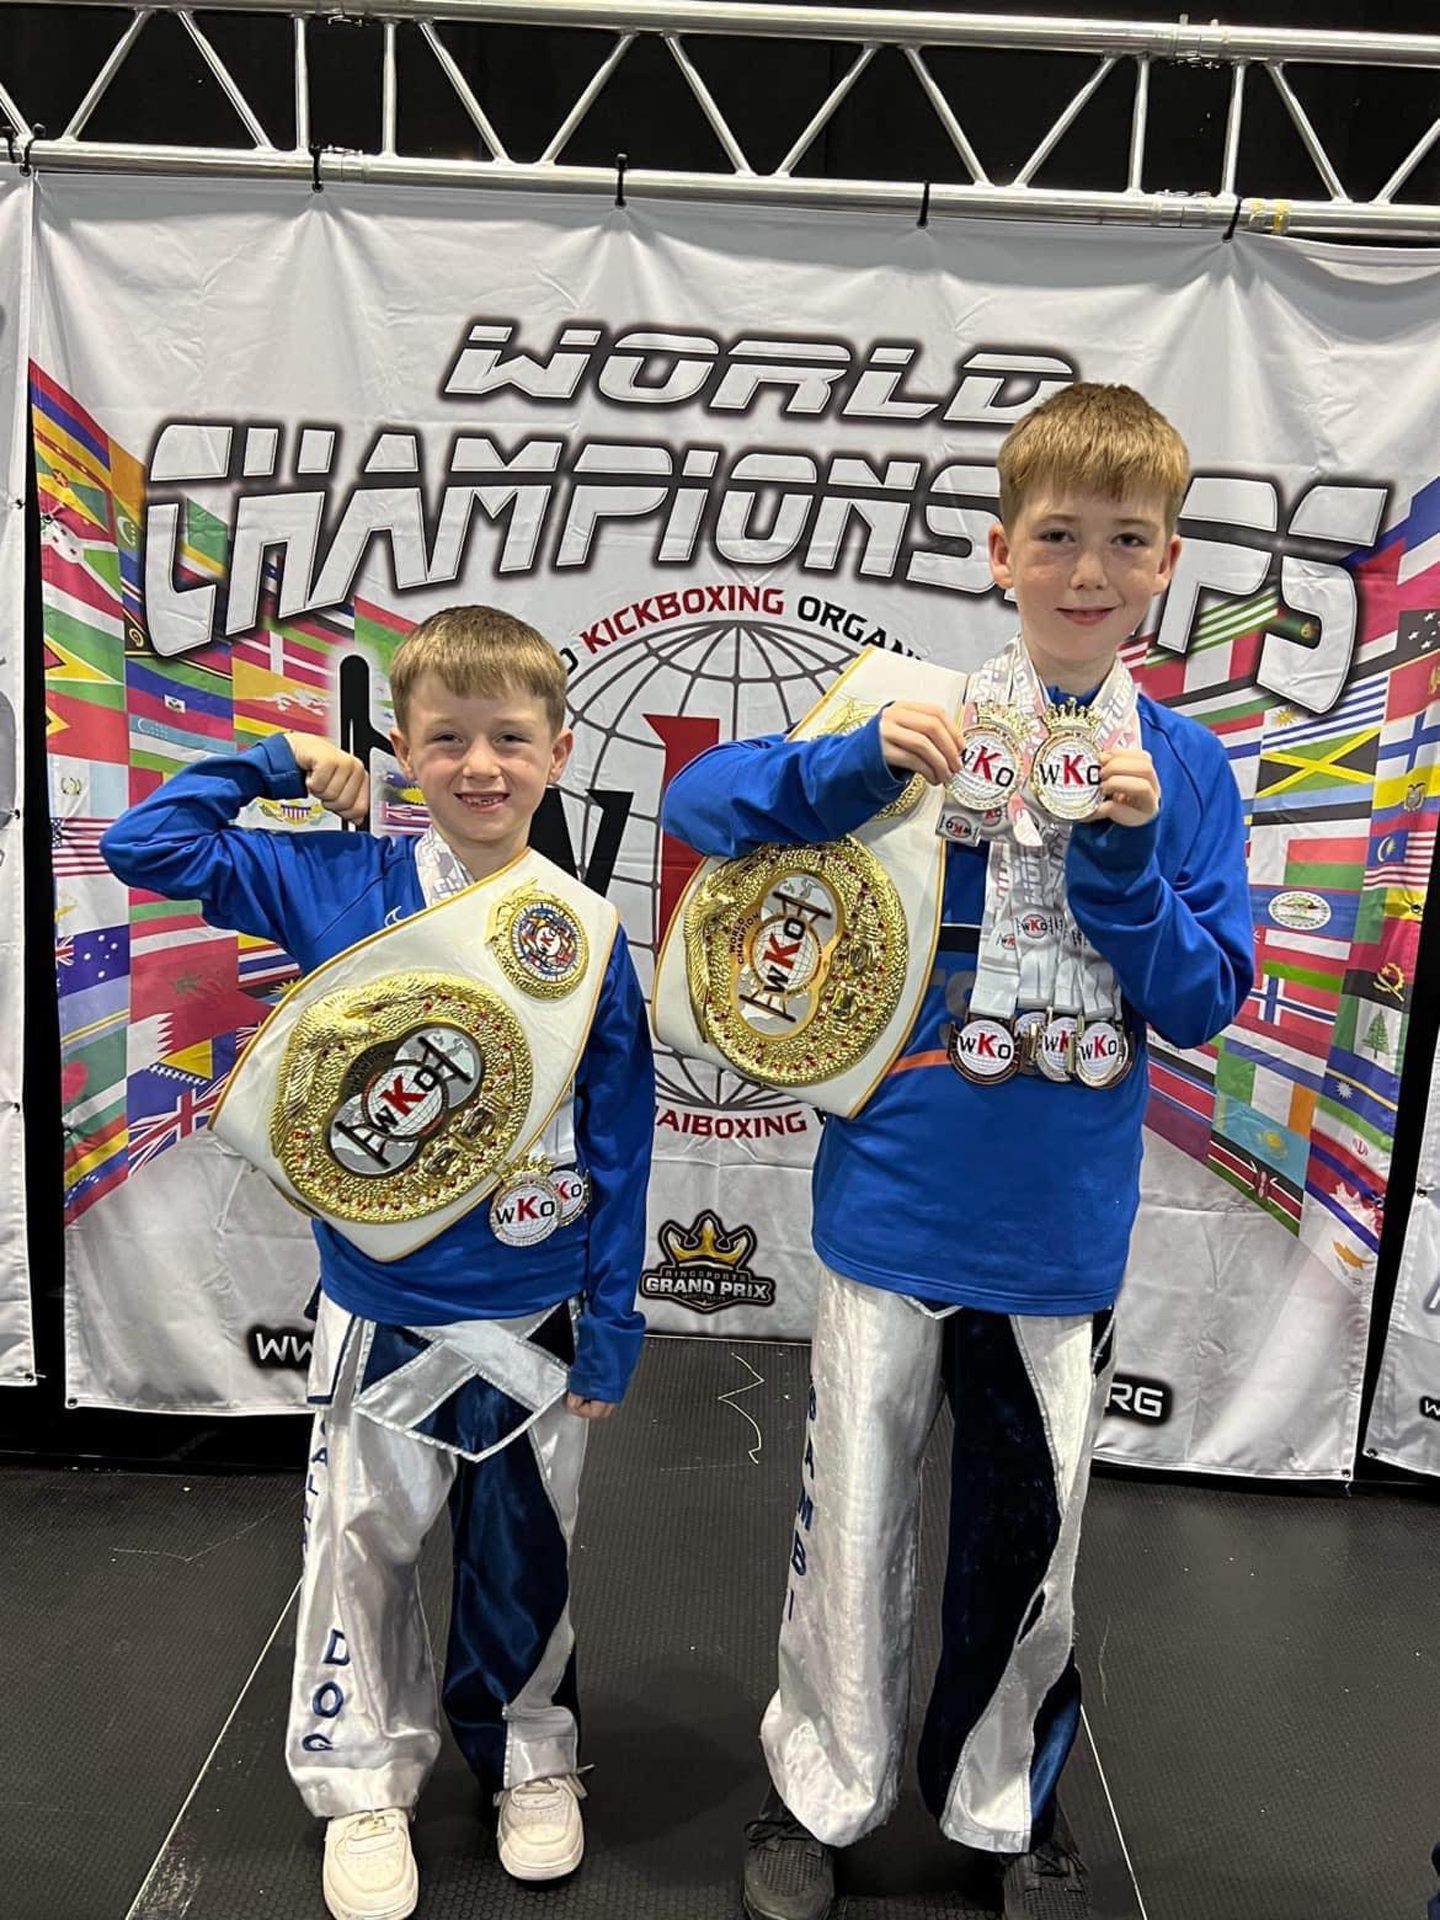 Chase and Rio with their medals and belts